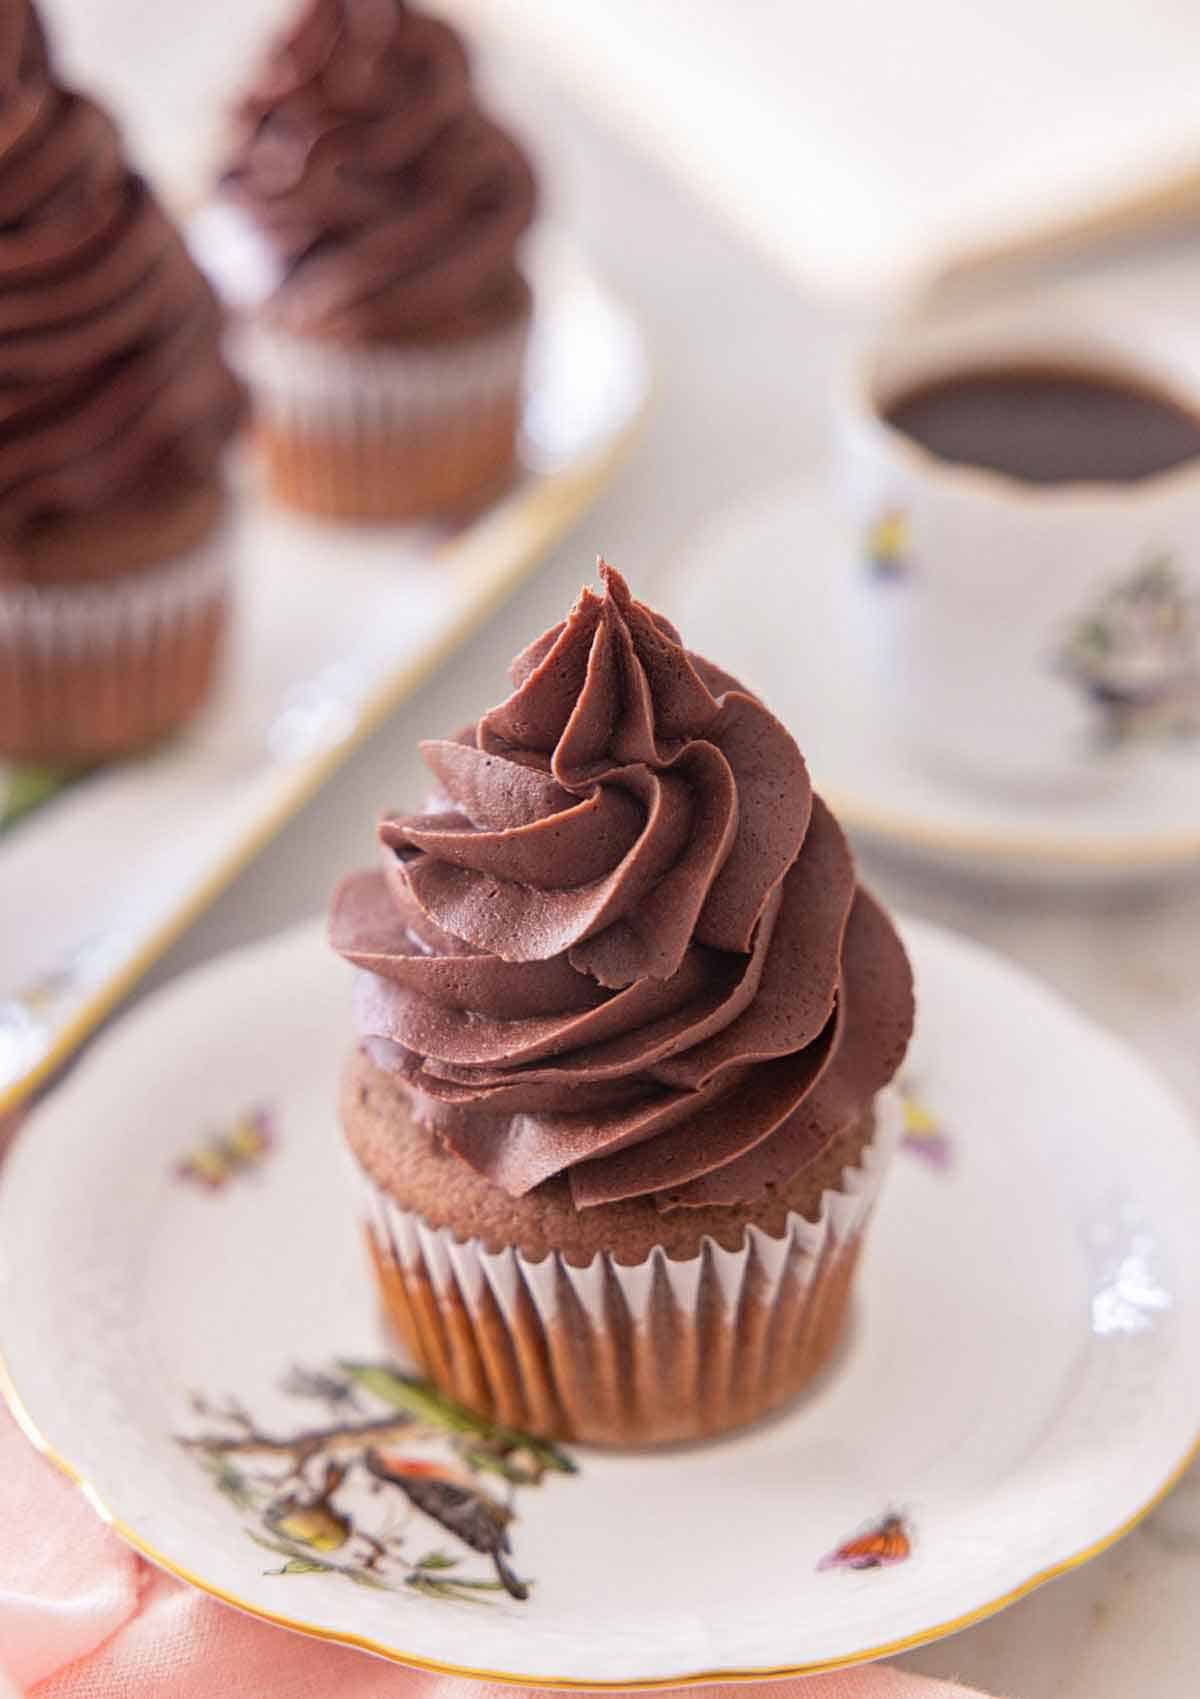 A cupcake with chocolate buttercream frosting piped on top.